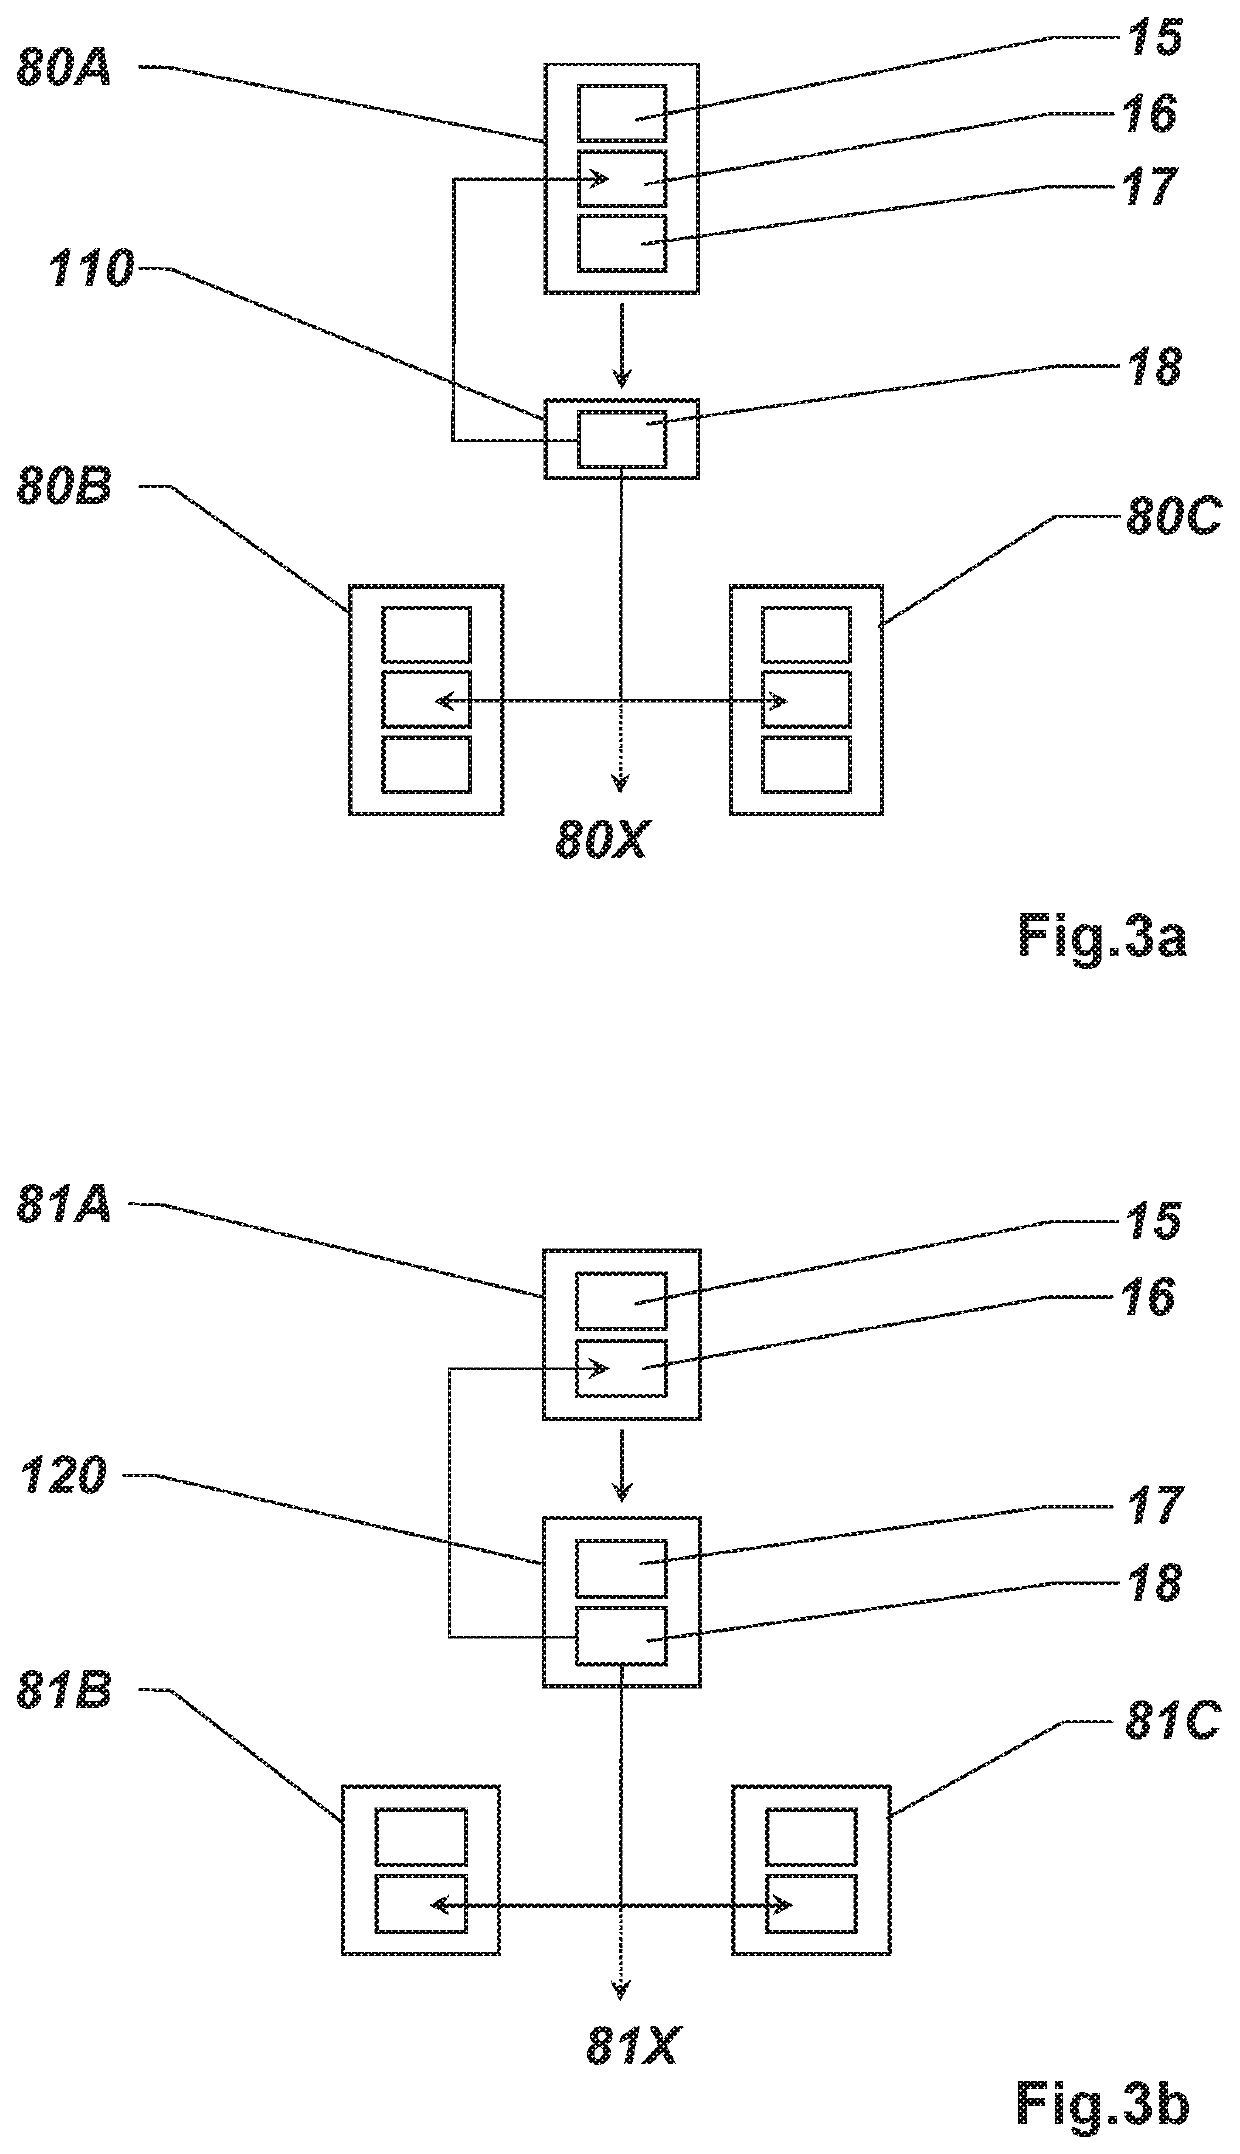 Method for assigning particular classes of interest within measurement data